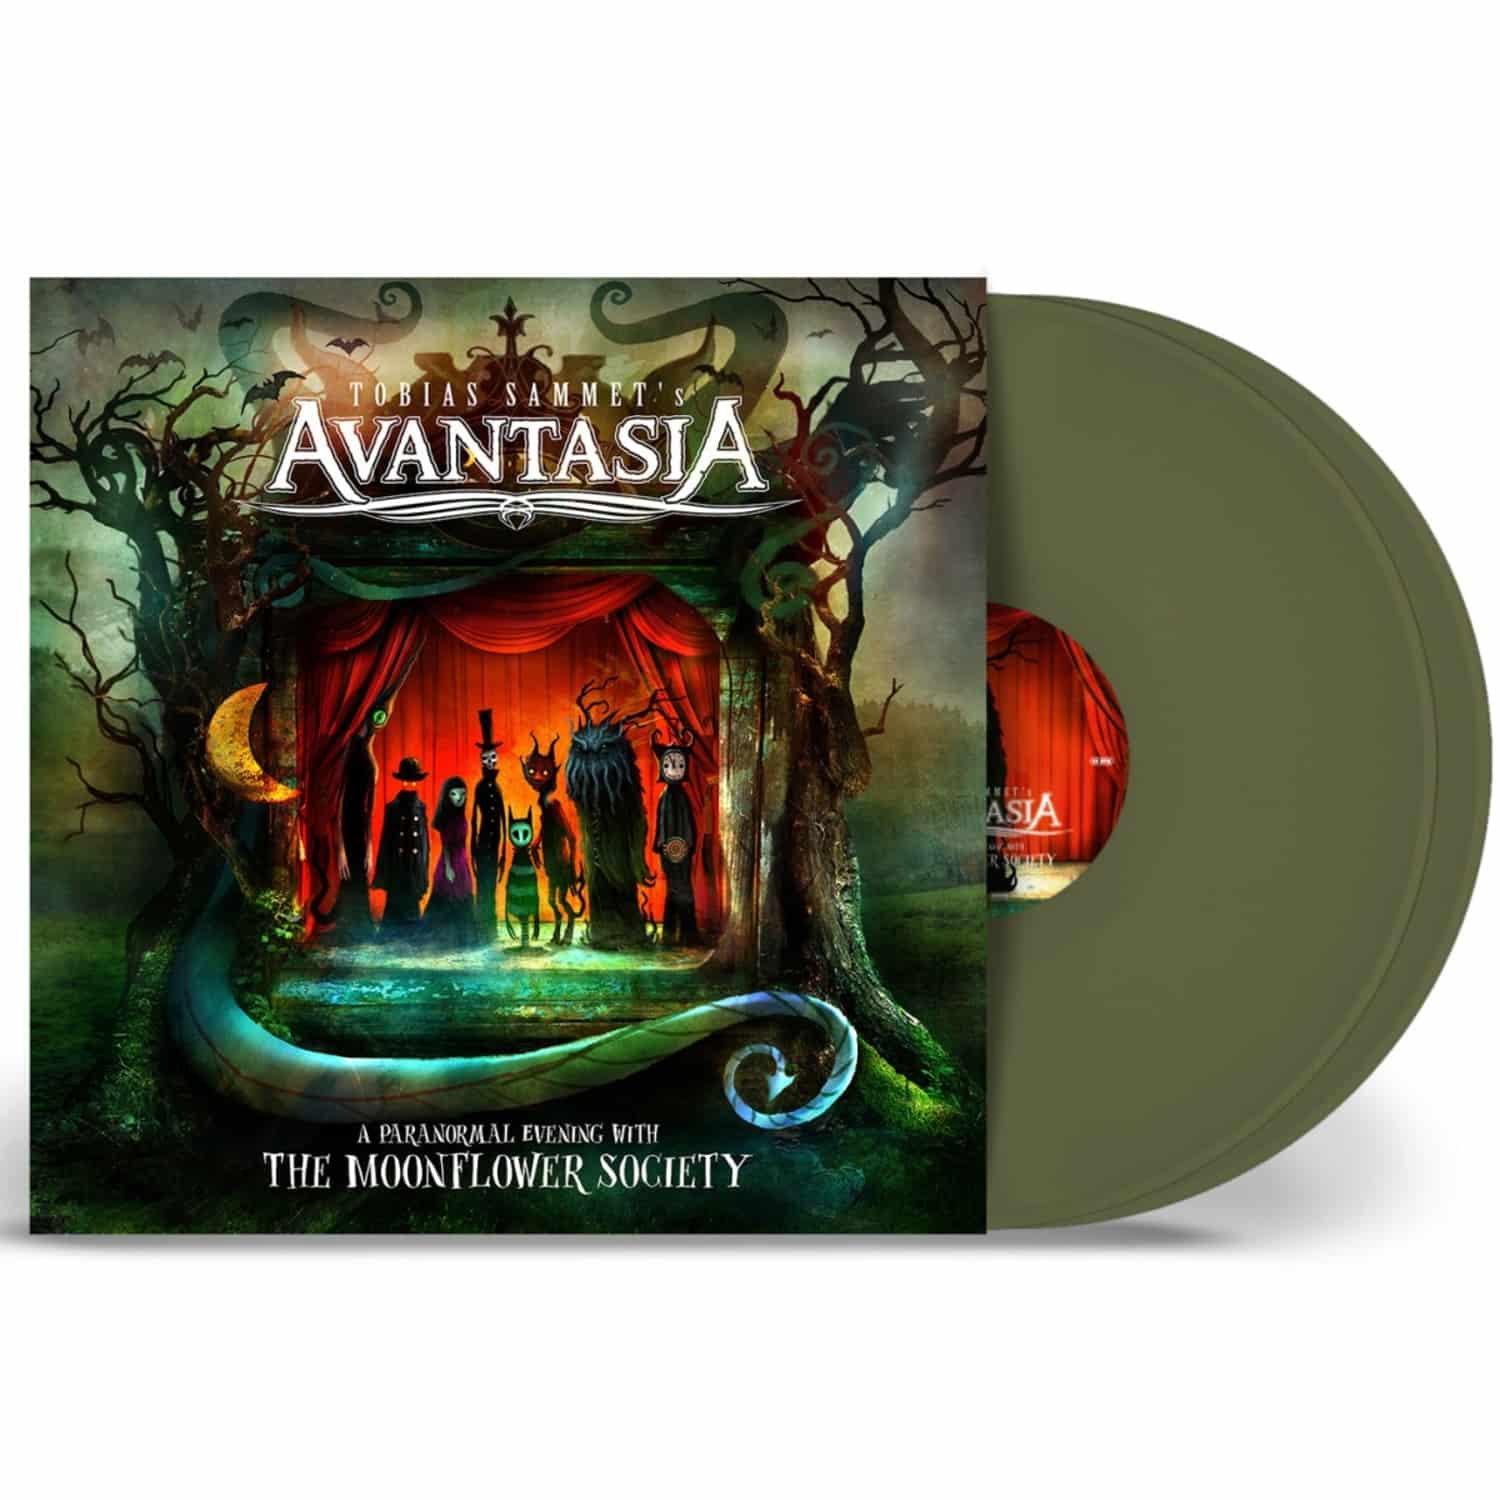 Avantasia - A PARANORMAL EVENING WITH THE MOONFLOWER SOCIETY 